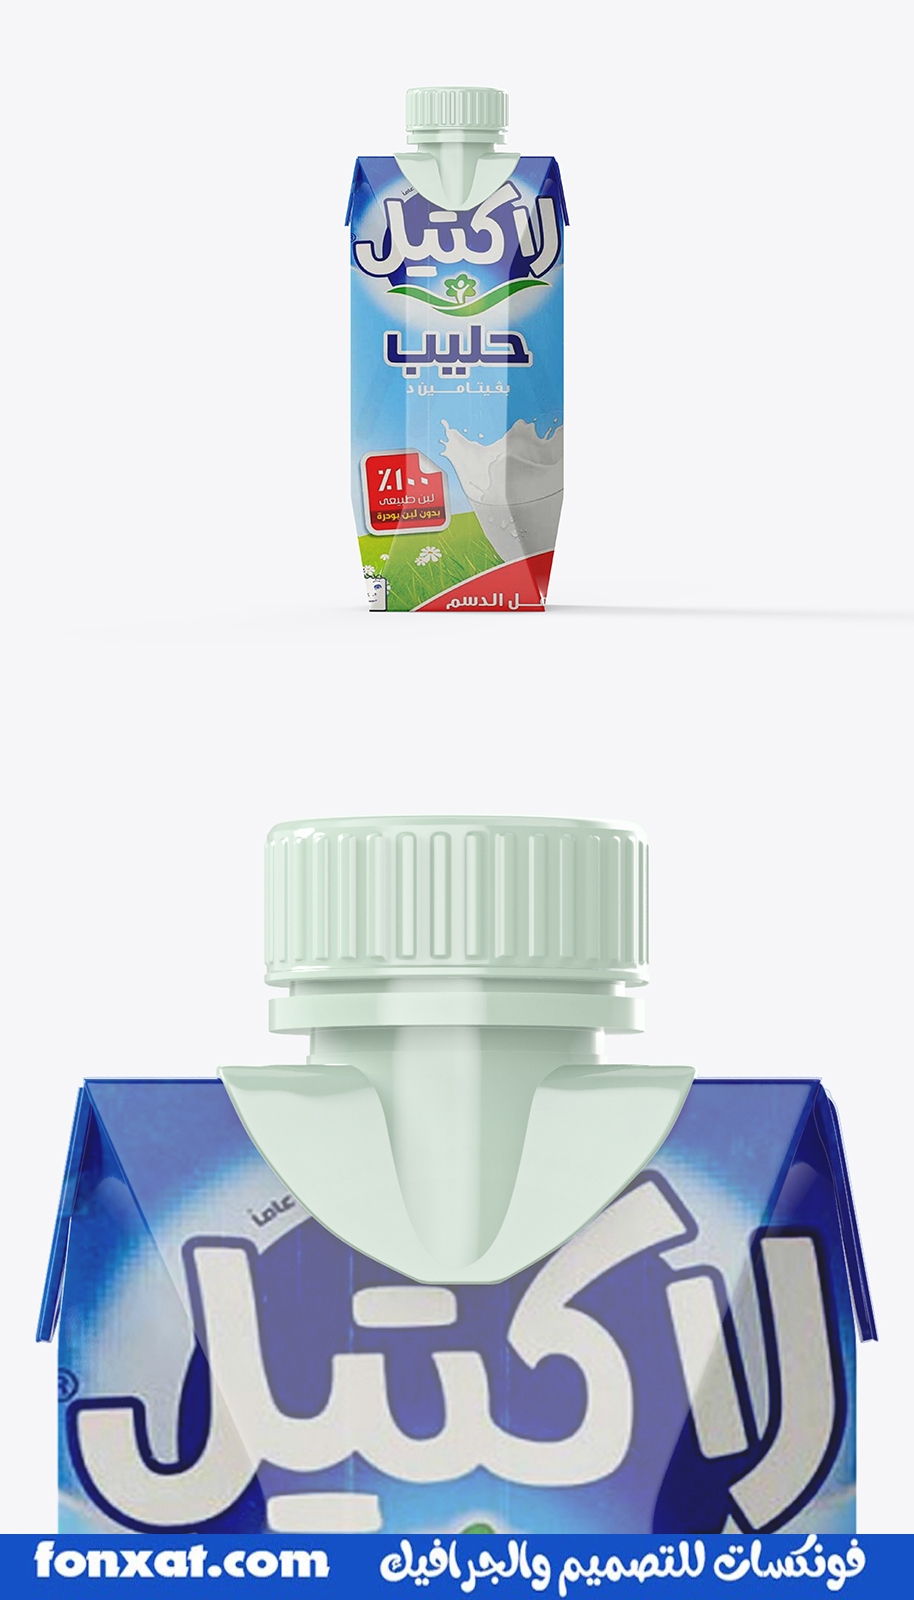 Mockup professionally designed juice boxes with the highest possible accuracy